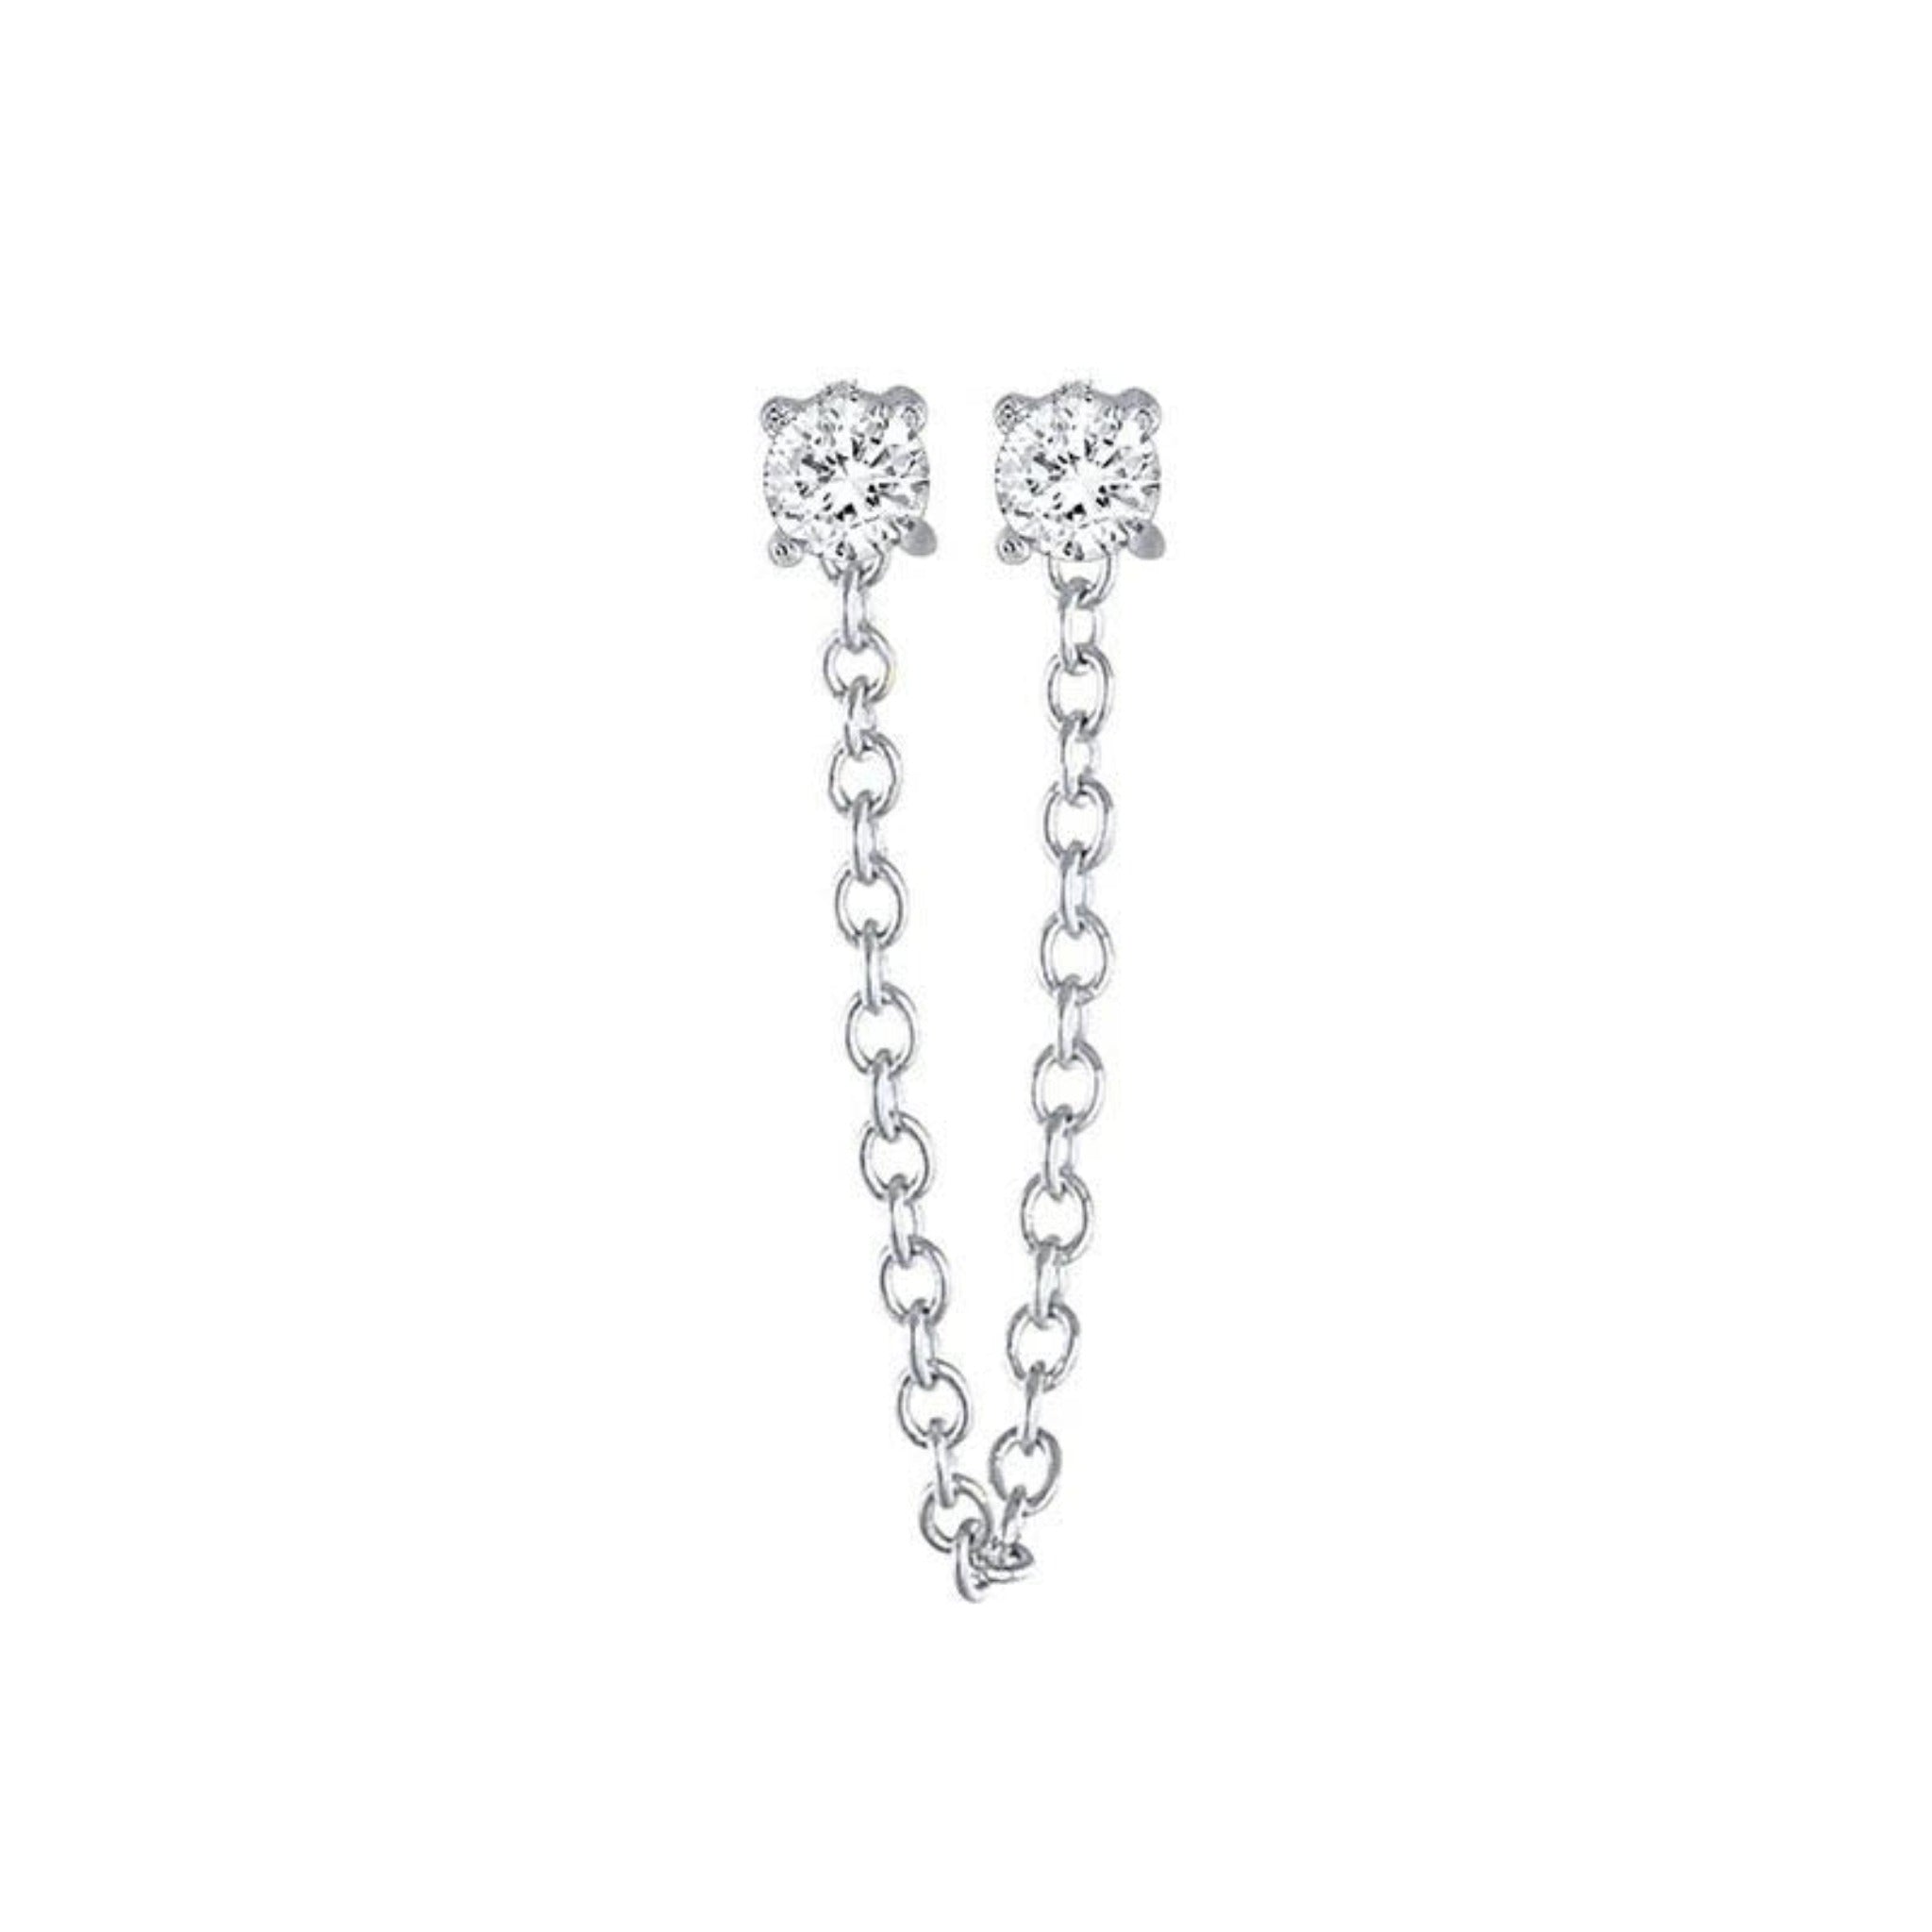 Double stone Chain connector earring pair